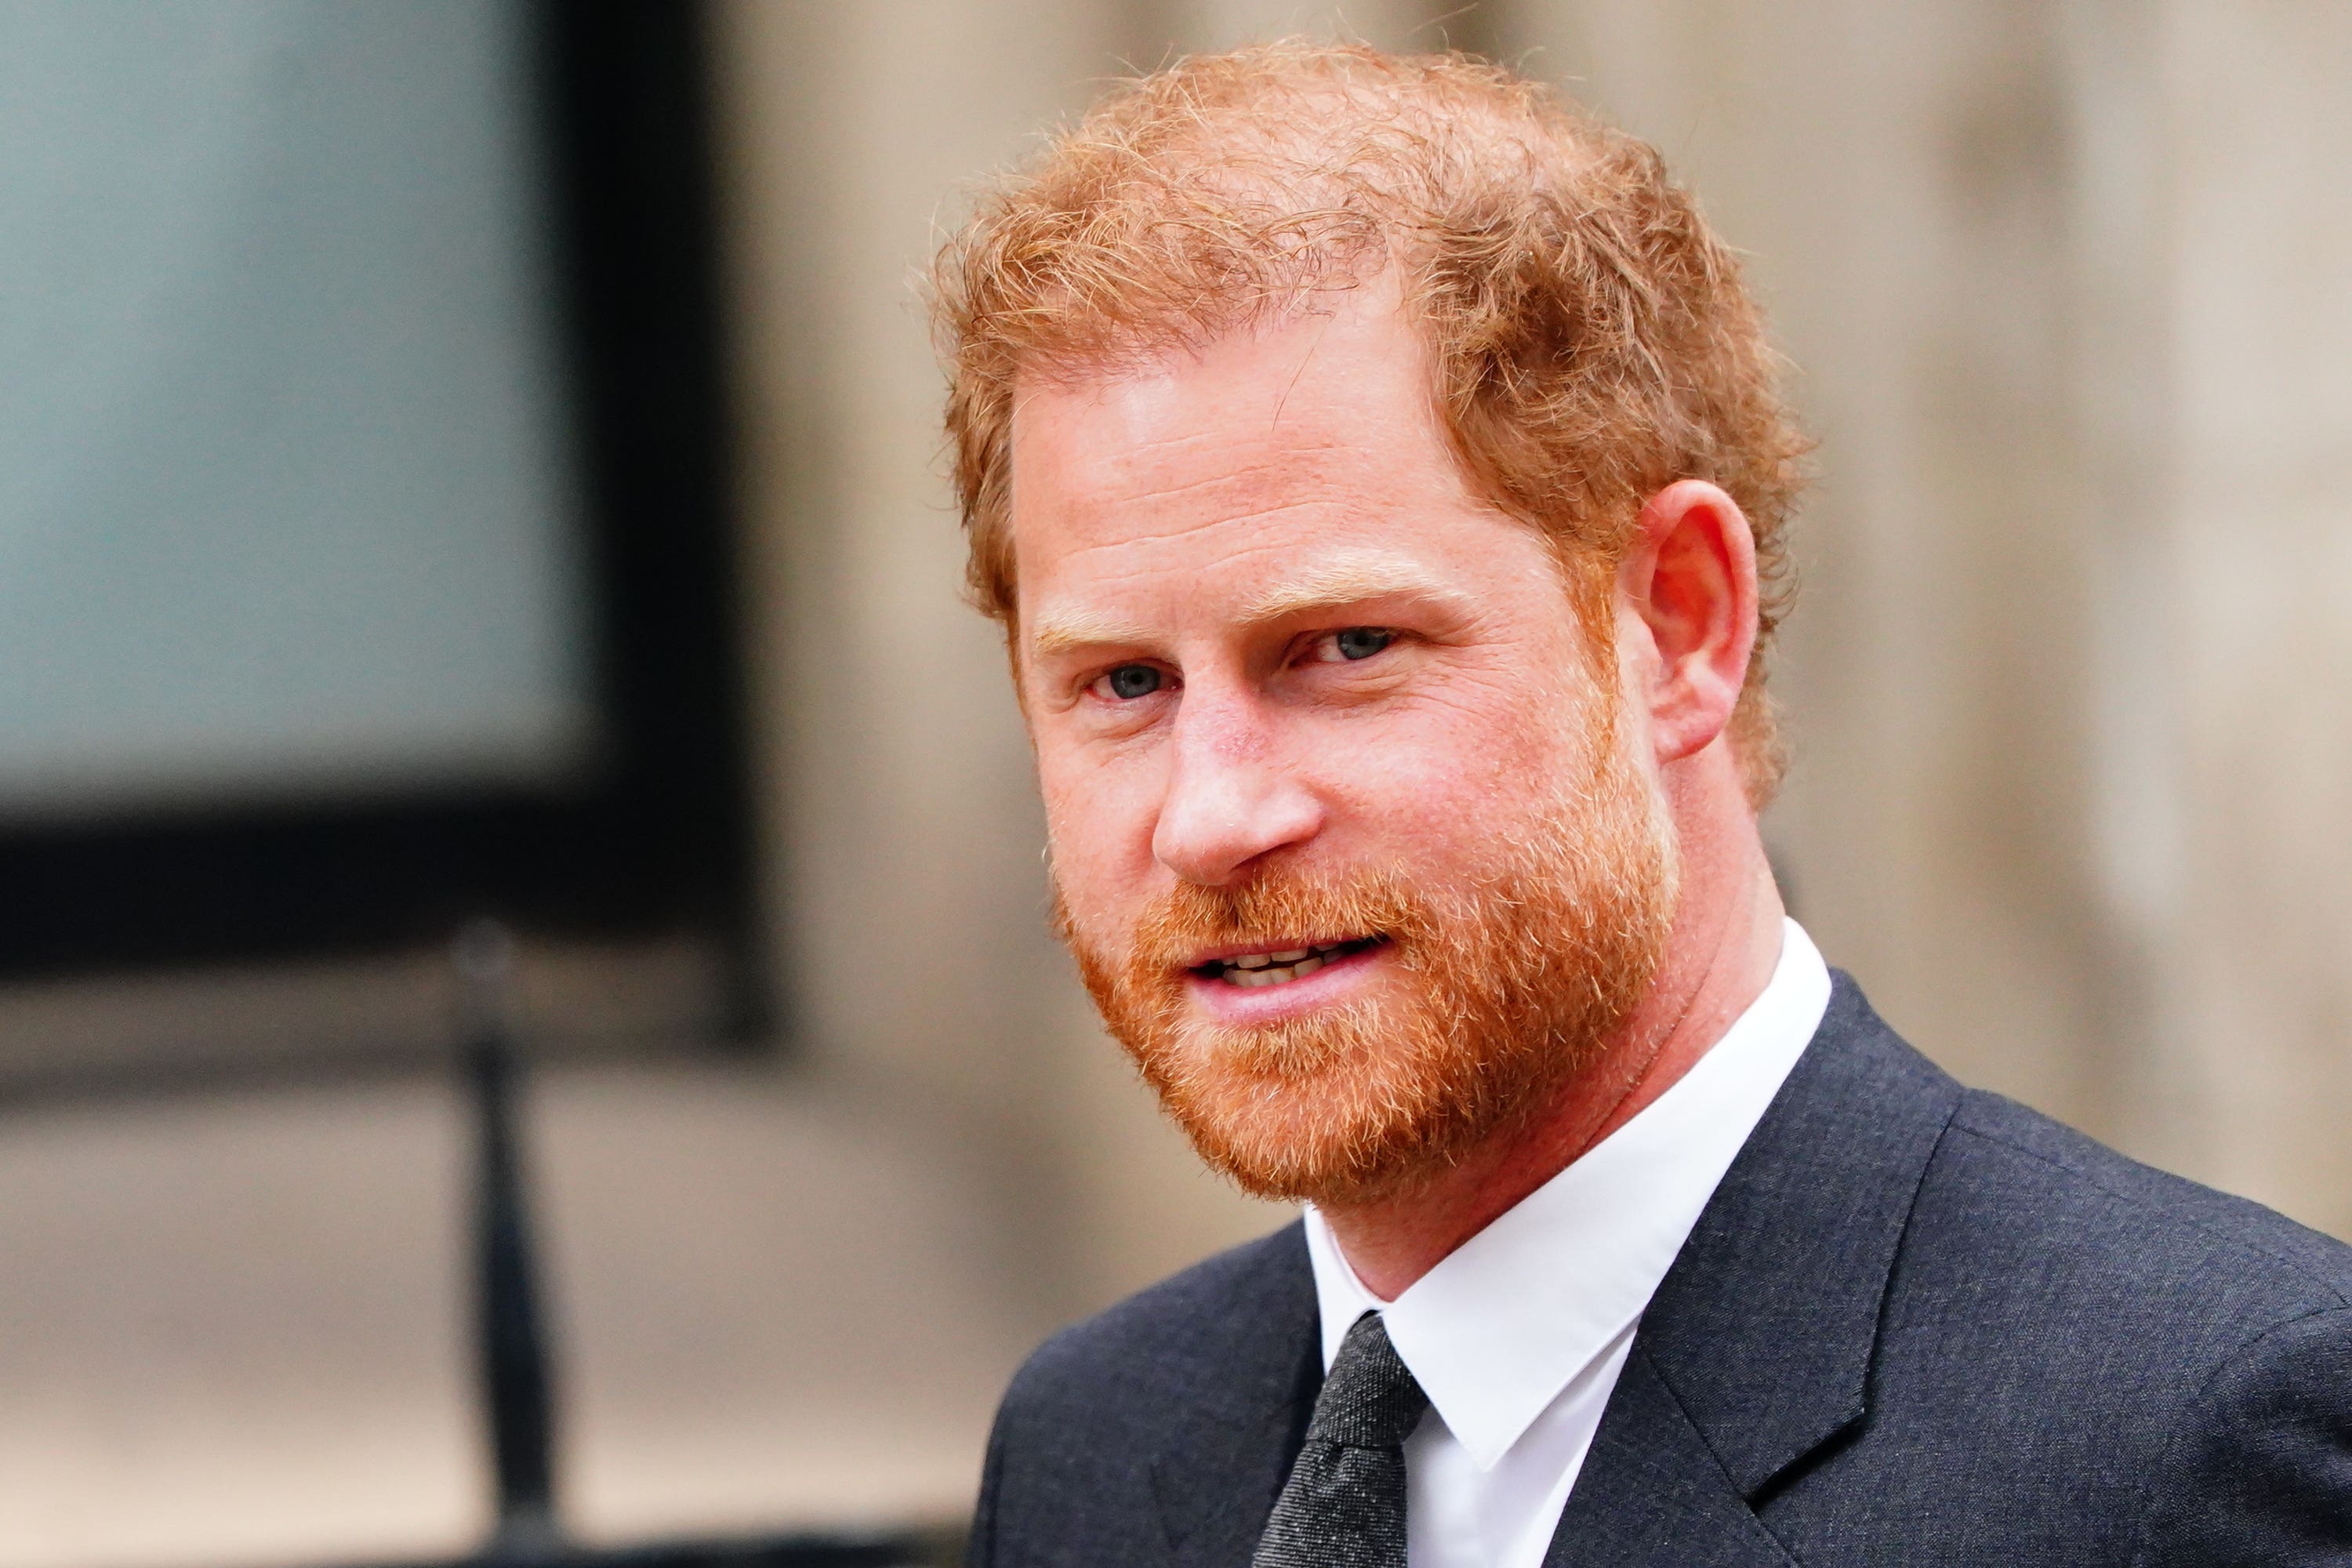 The Duke of Sussex is due to appear in court